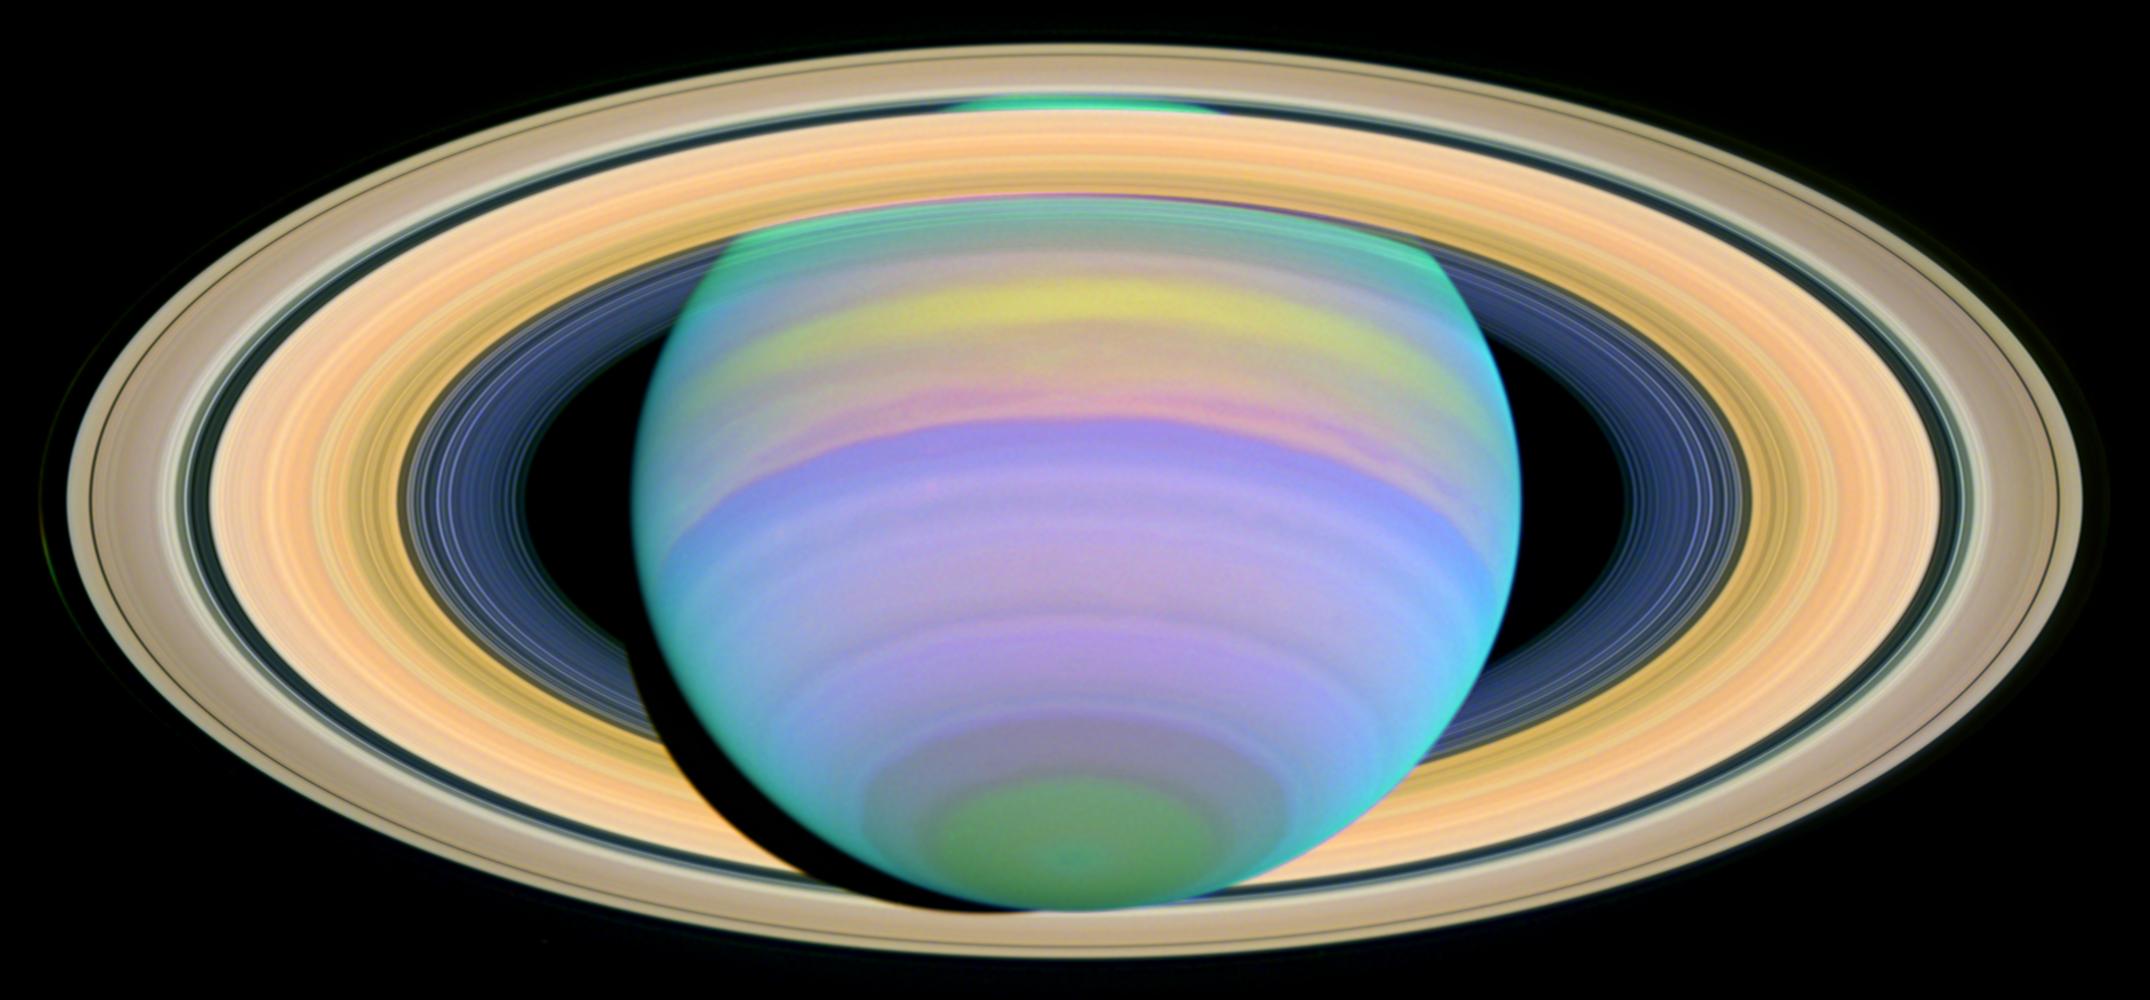 Saturn, seen in purples, greens and blues, is surrounded by its bright yellow rings.